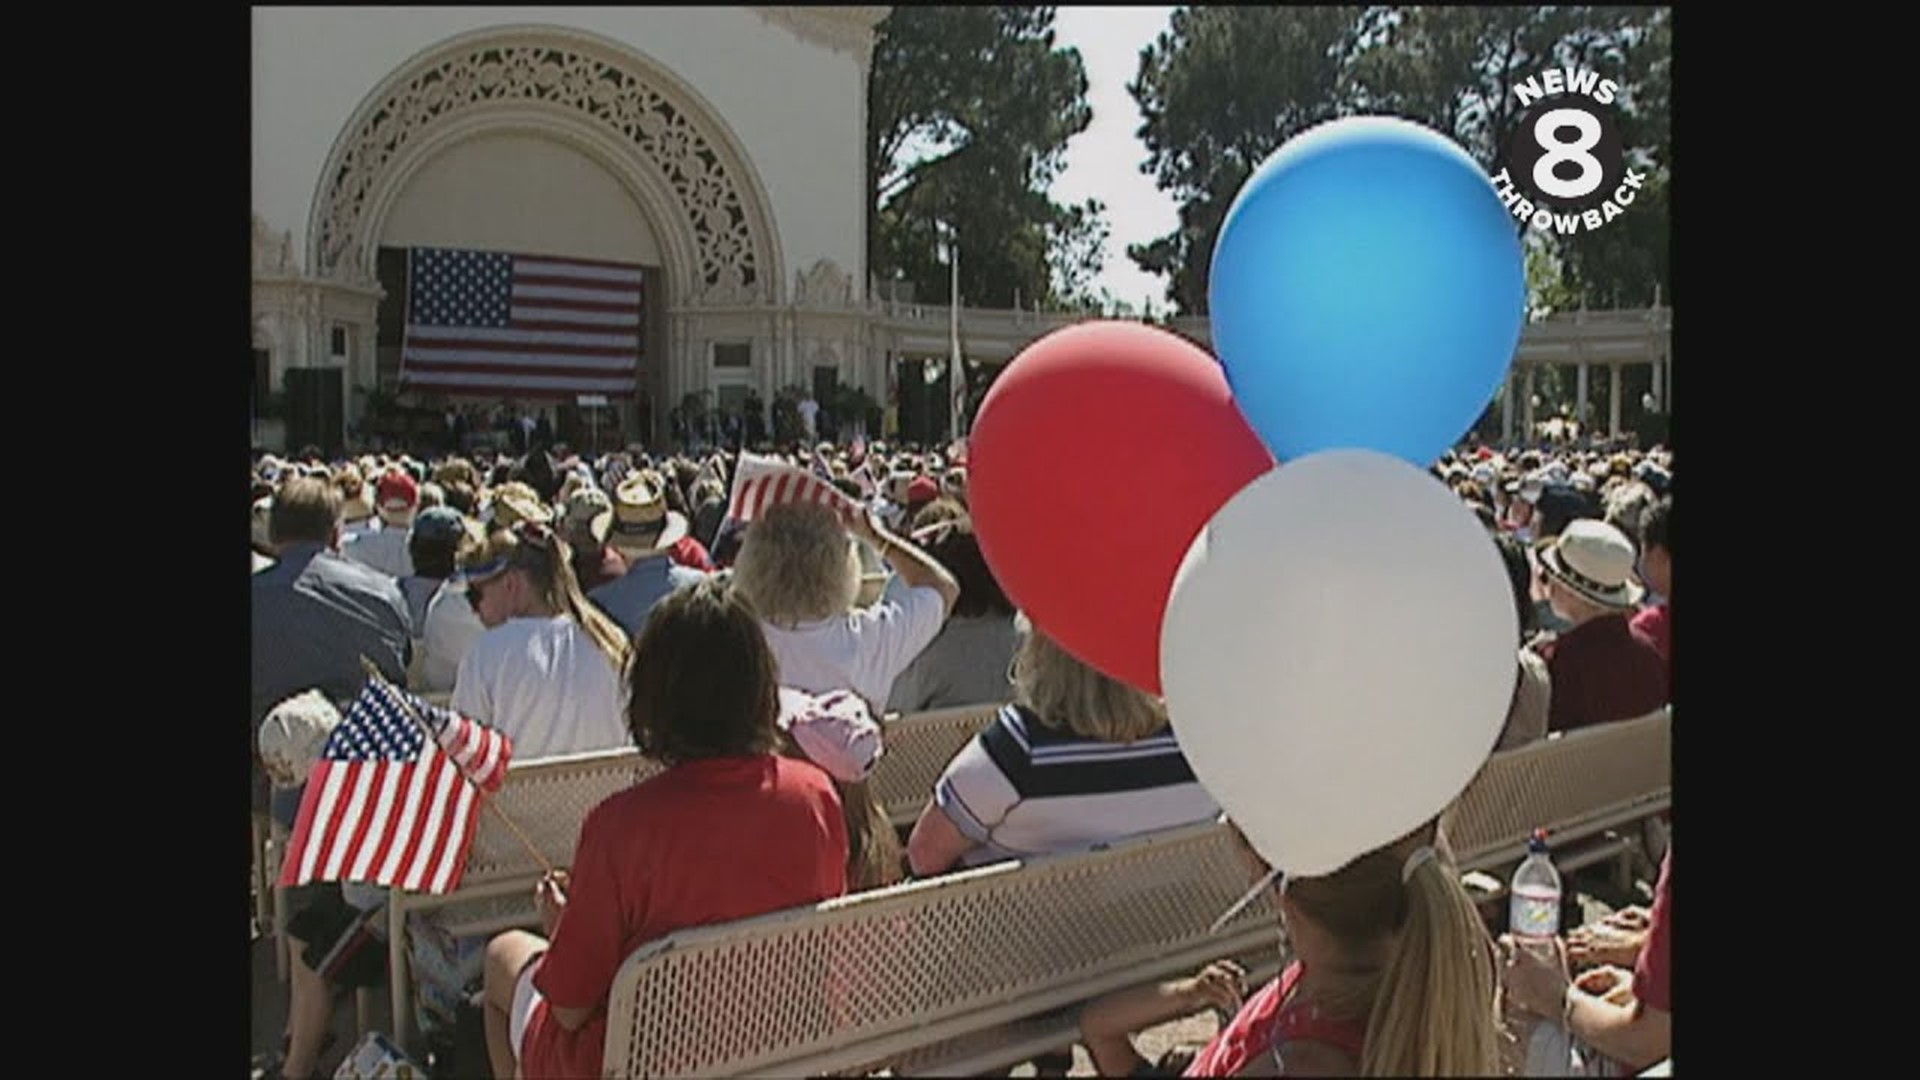 Day of Remembrance 9/11 ceremony in Balboa Park, San Diego - Sept. 16, 2001